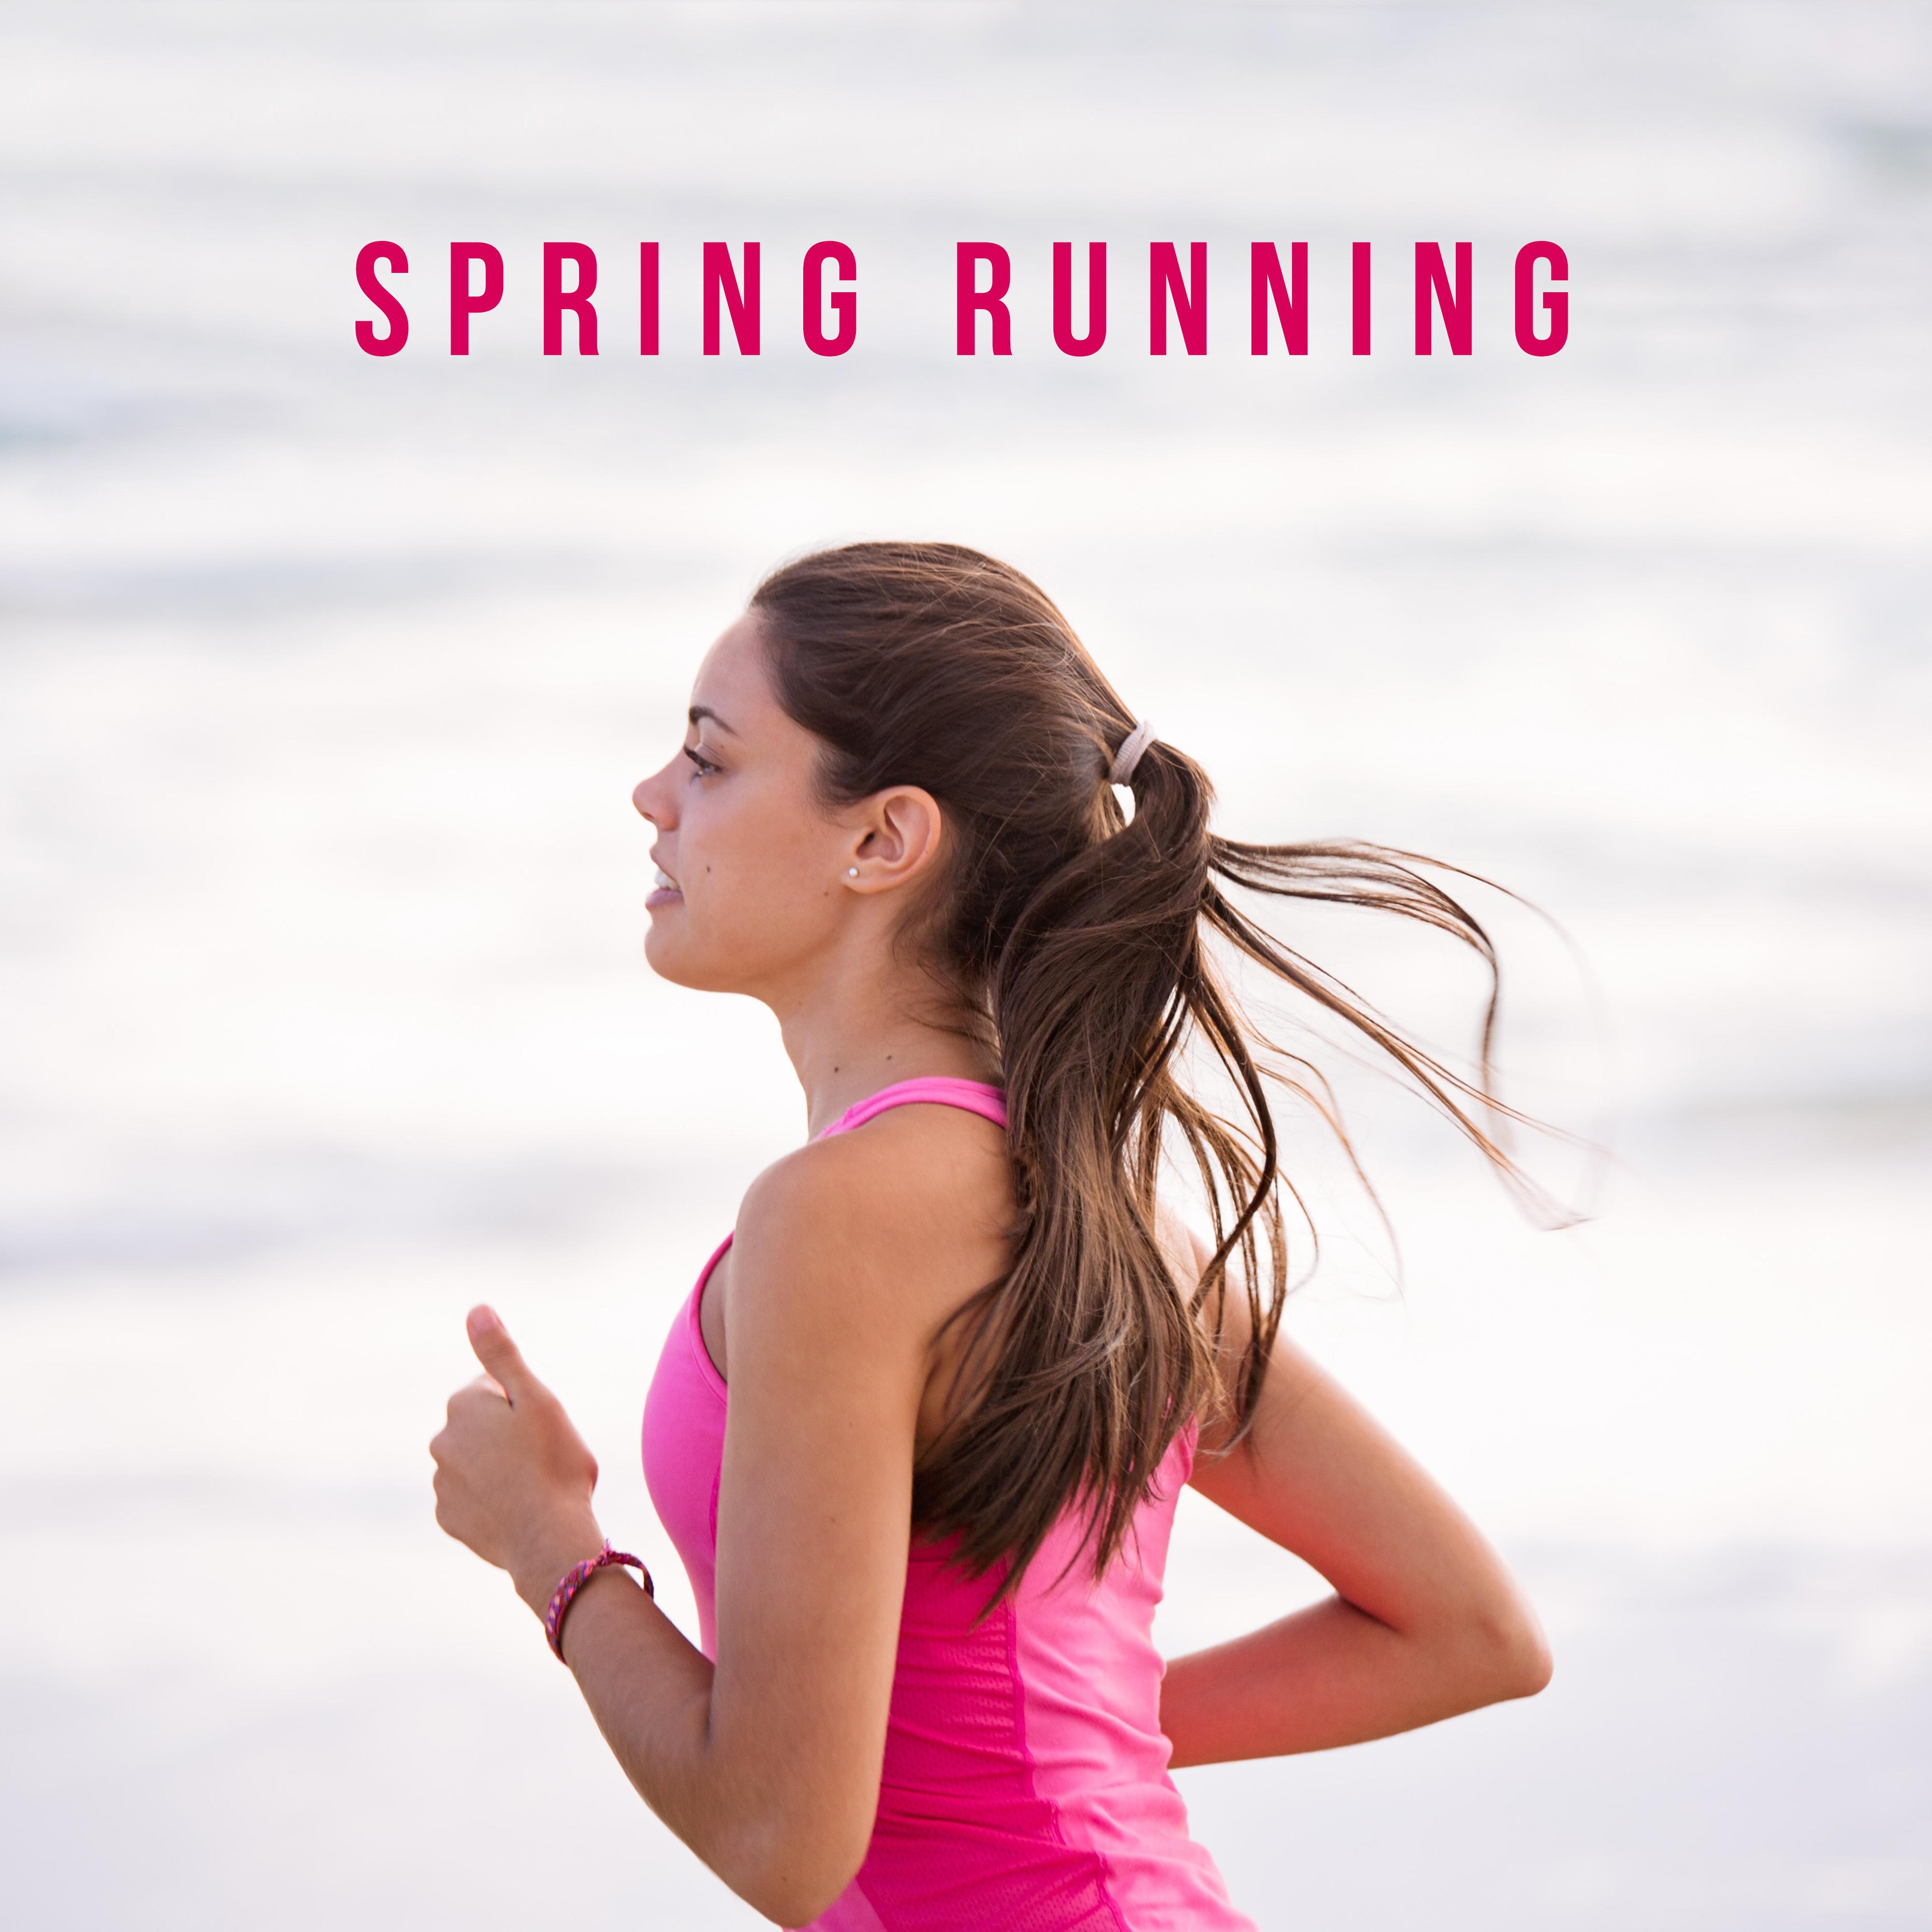 Spring Running – Chill Zone Music, Chillout Sounds for Training, Running Music 2019, Ibiza Chill Mood, Spring Chill Out 2019